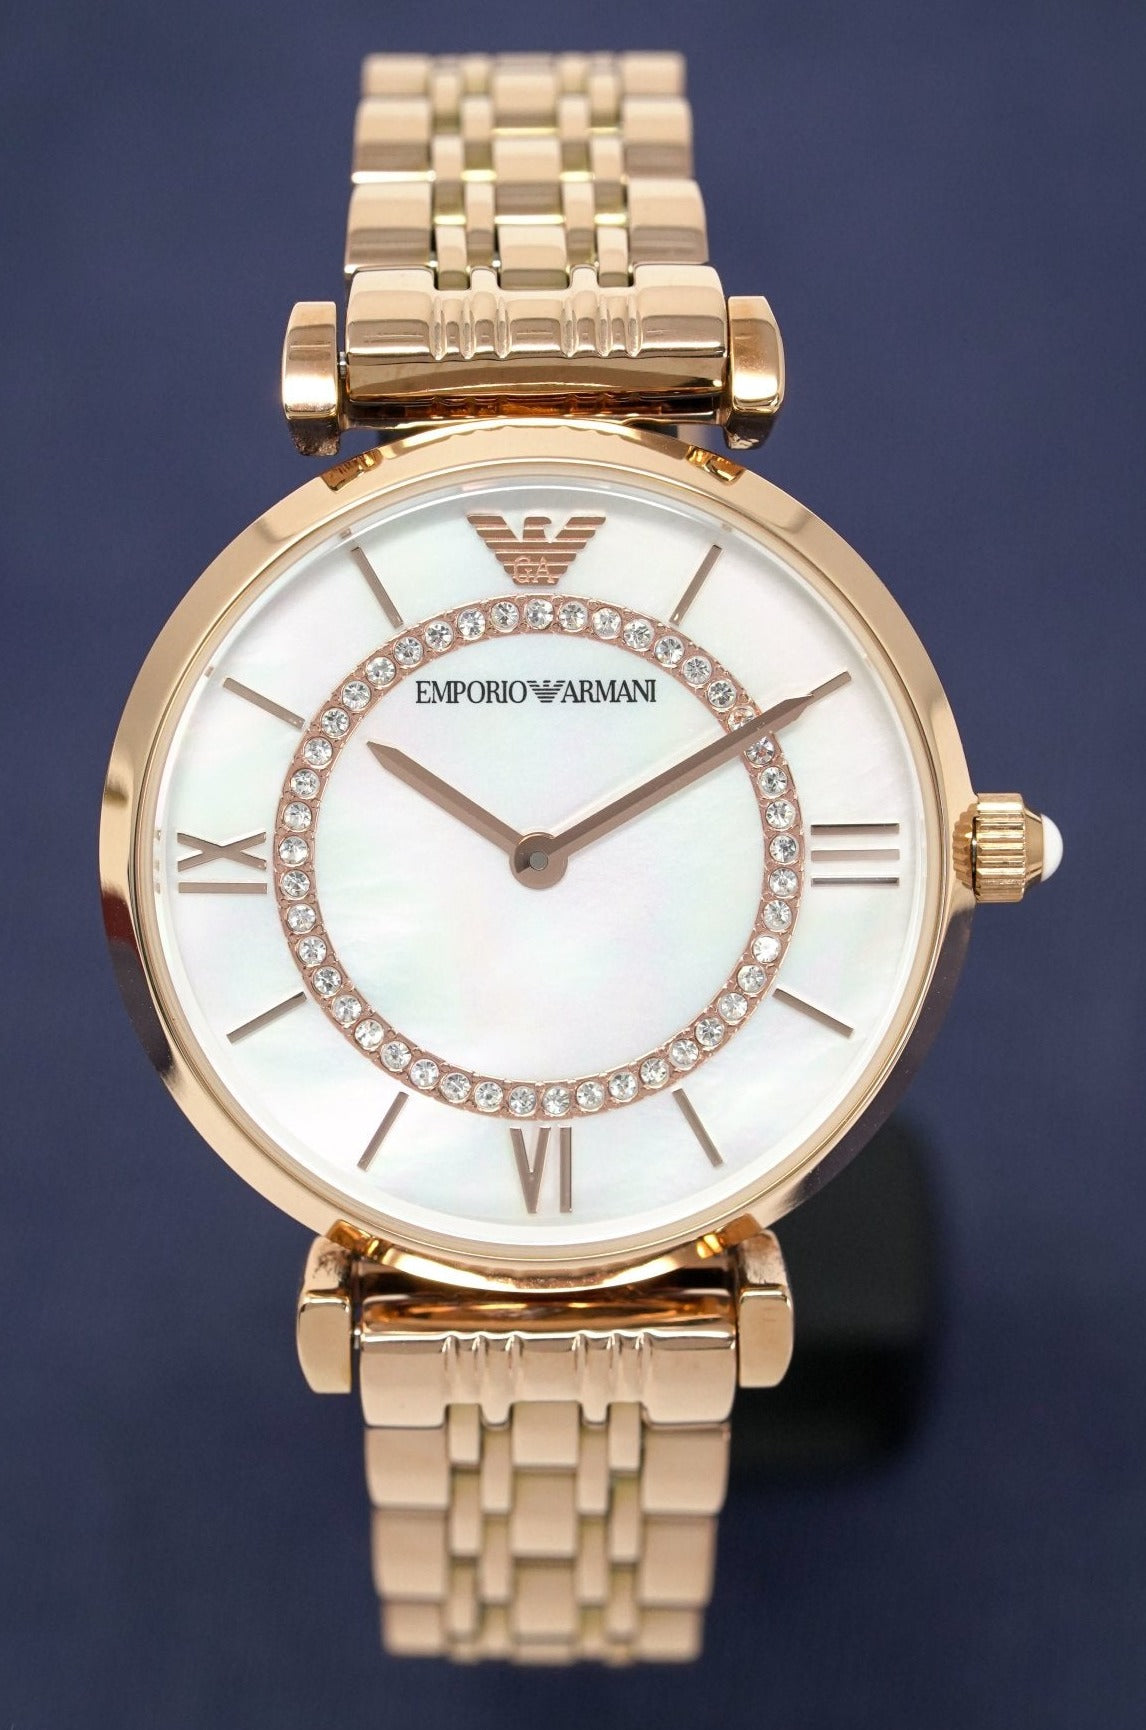 Emporio Armani Ladies T-Bar Gianni Watch Rose Gold Plated AR1909 - Watches & Crystals